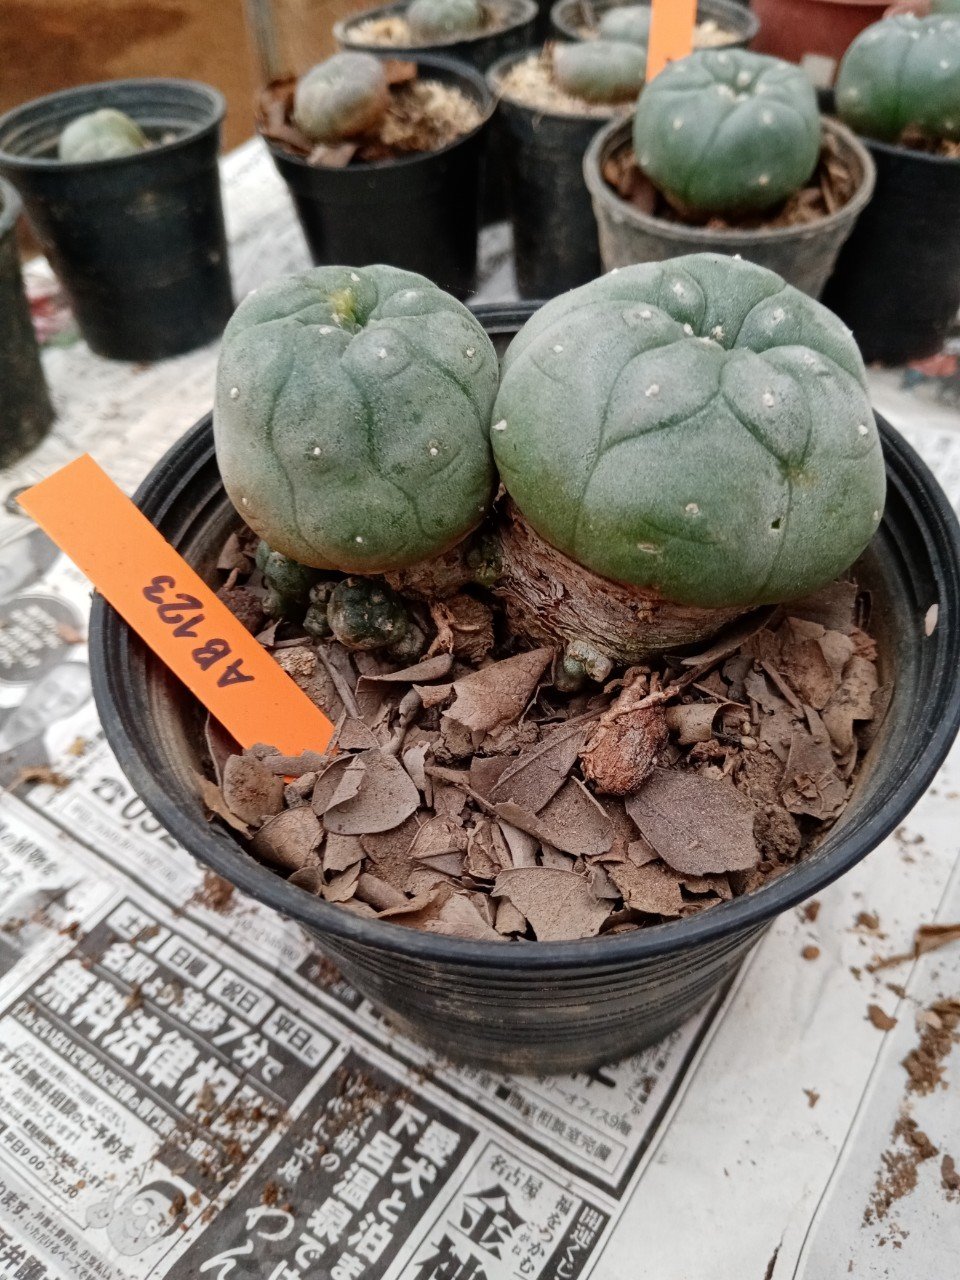 Lophophora williamsii size 4-5 cm 4-5 years old - ownroot grow from seed